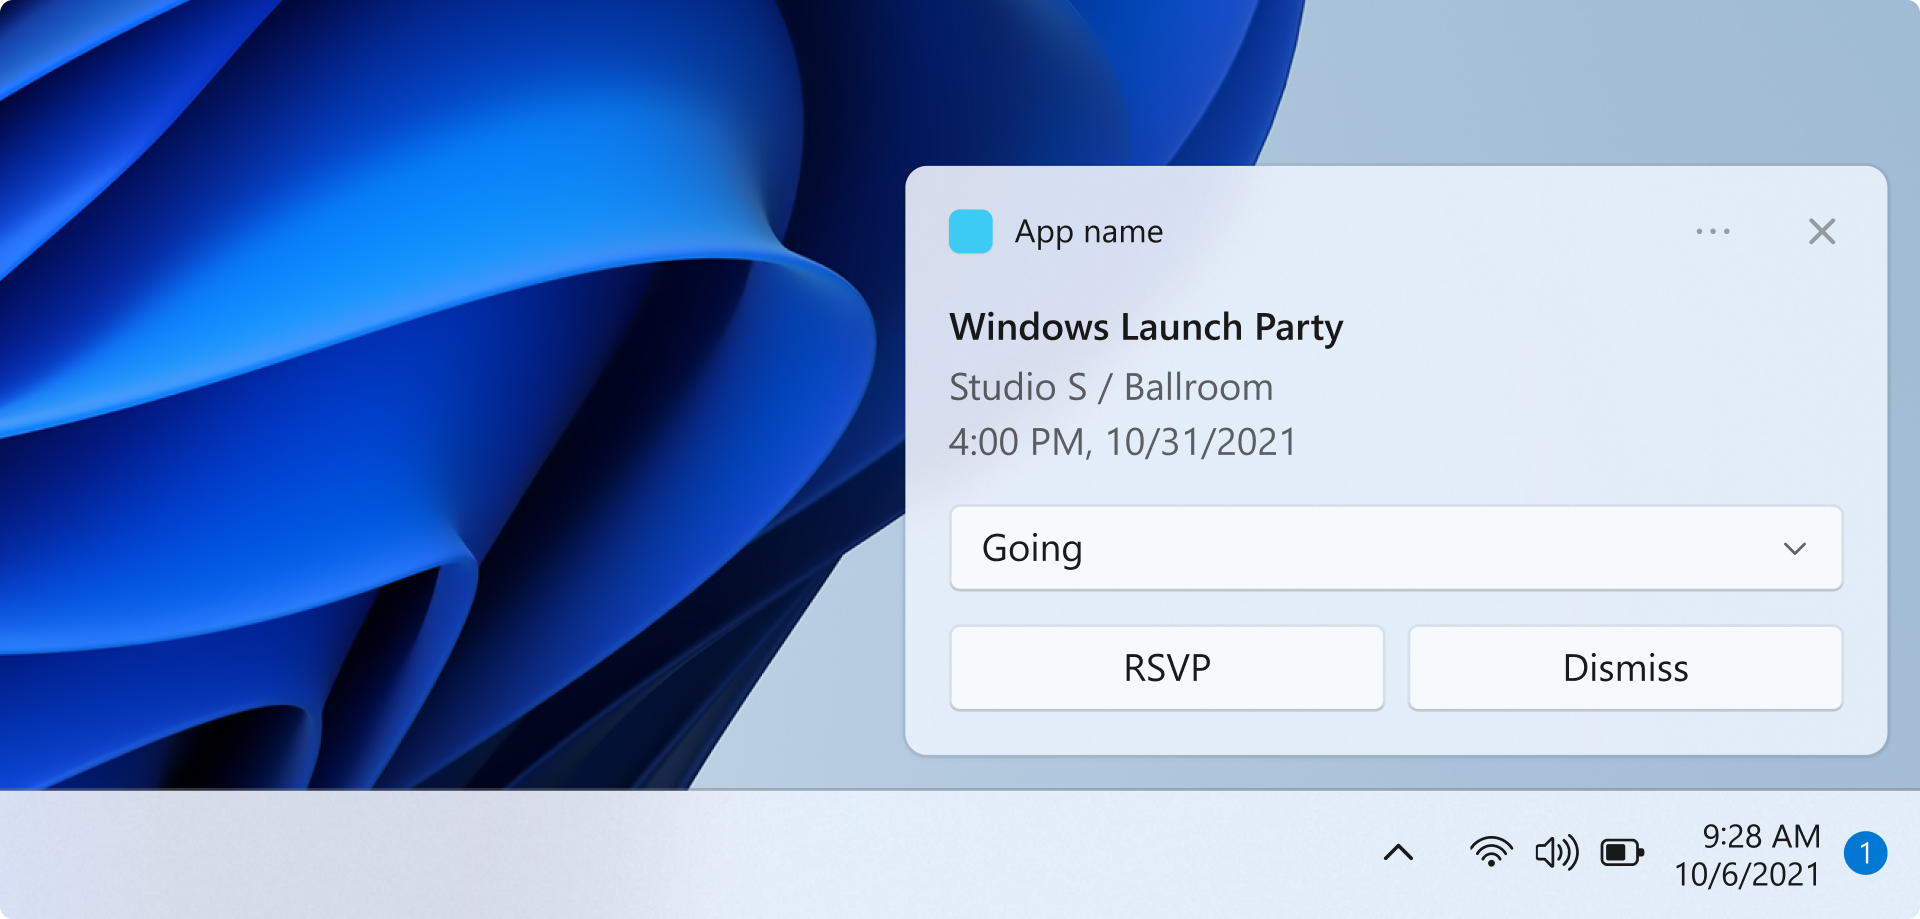 A screen capture showing a toast notification above the task bar. The notification is a reminder for an event. The app name, event name, event time, and event location are shown. A selection input displays the currently selected value, Going. There are two buttons labeled RSVP and Dismiss